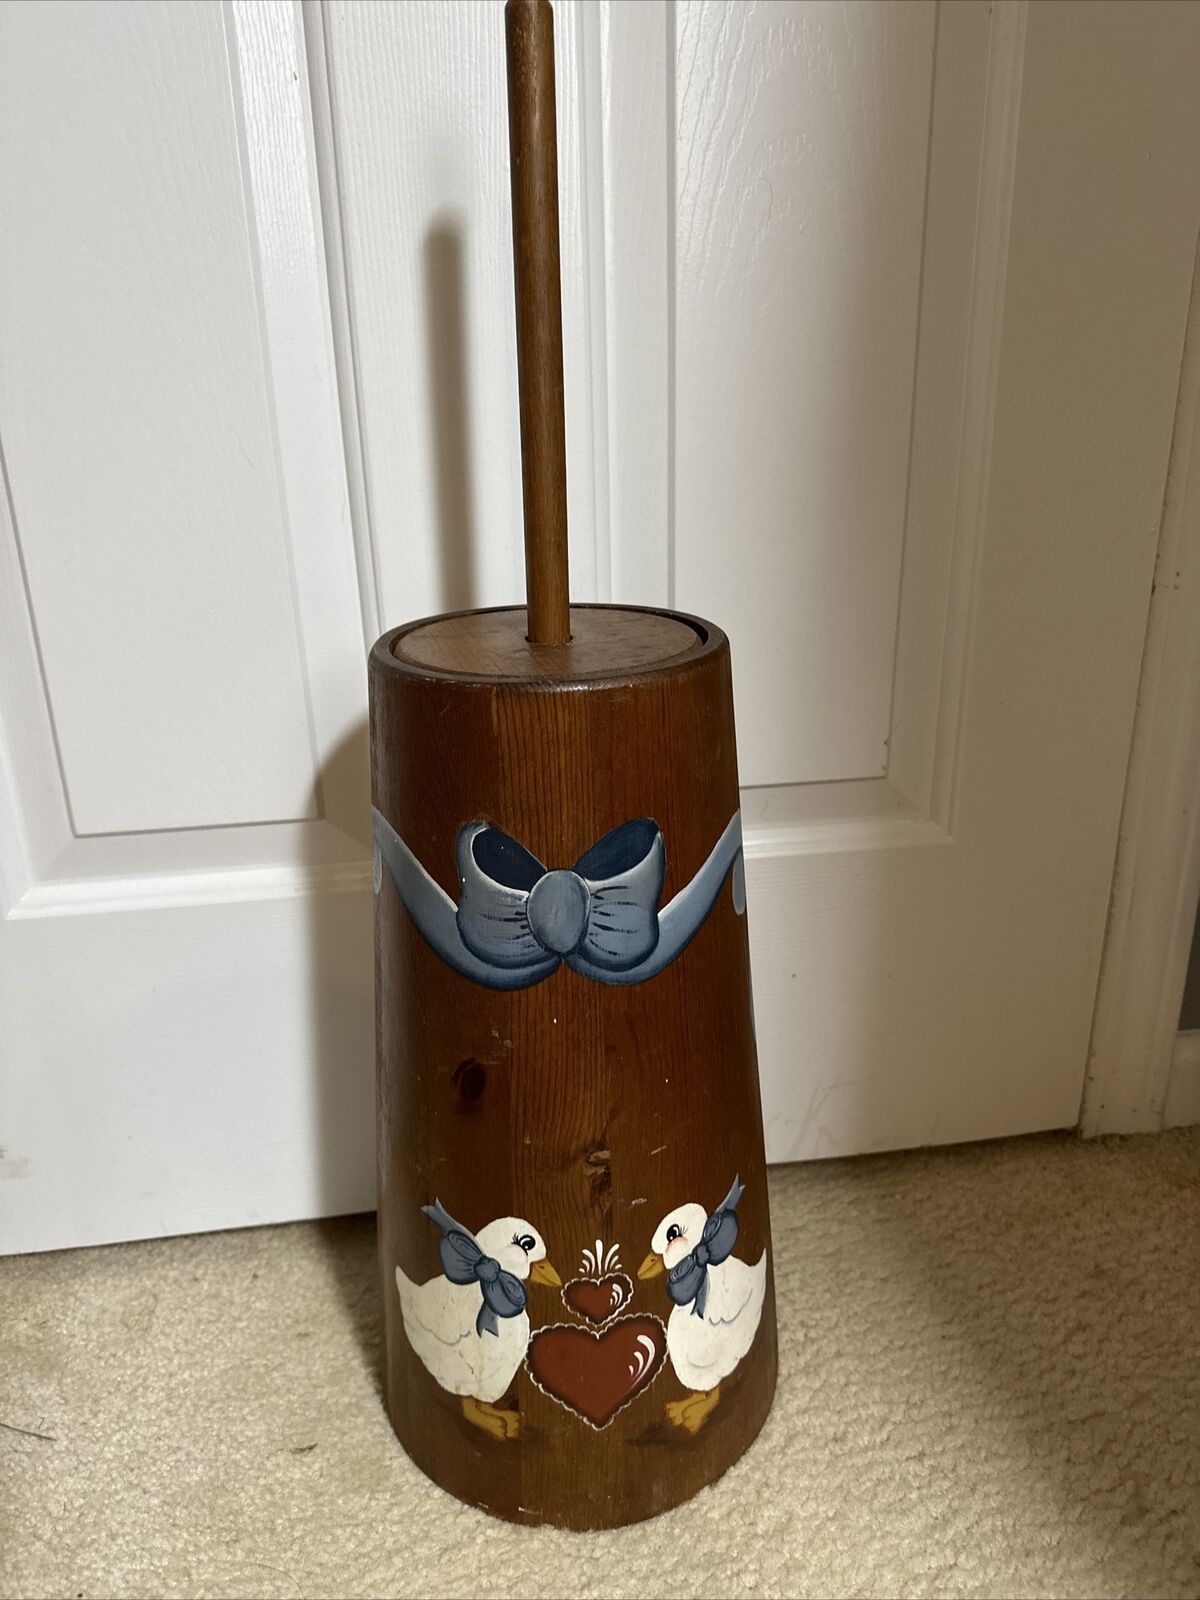 Vintage Wooden Butter Churn Handpainted Design Country Decor Ducks Hearts Bow